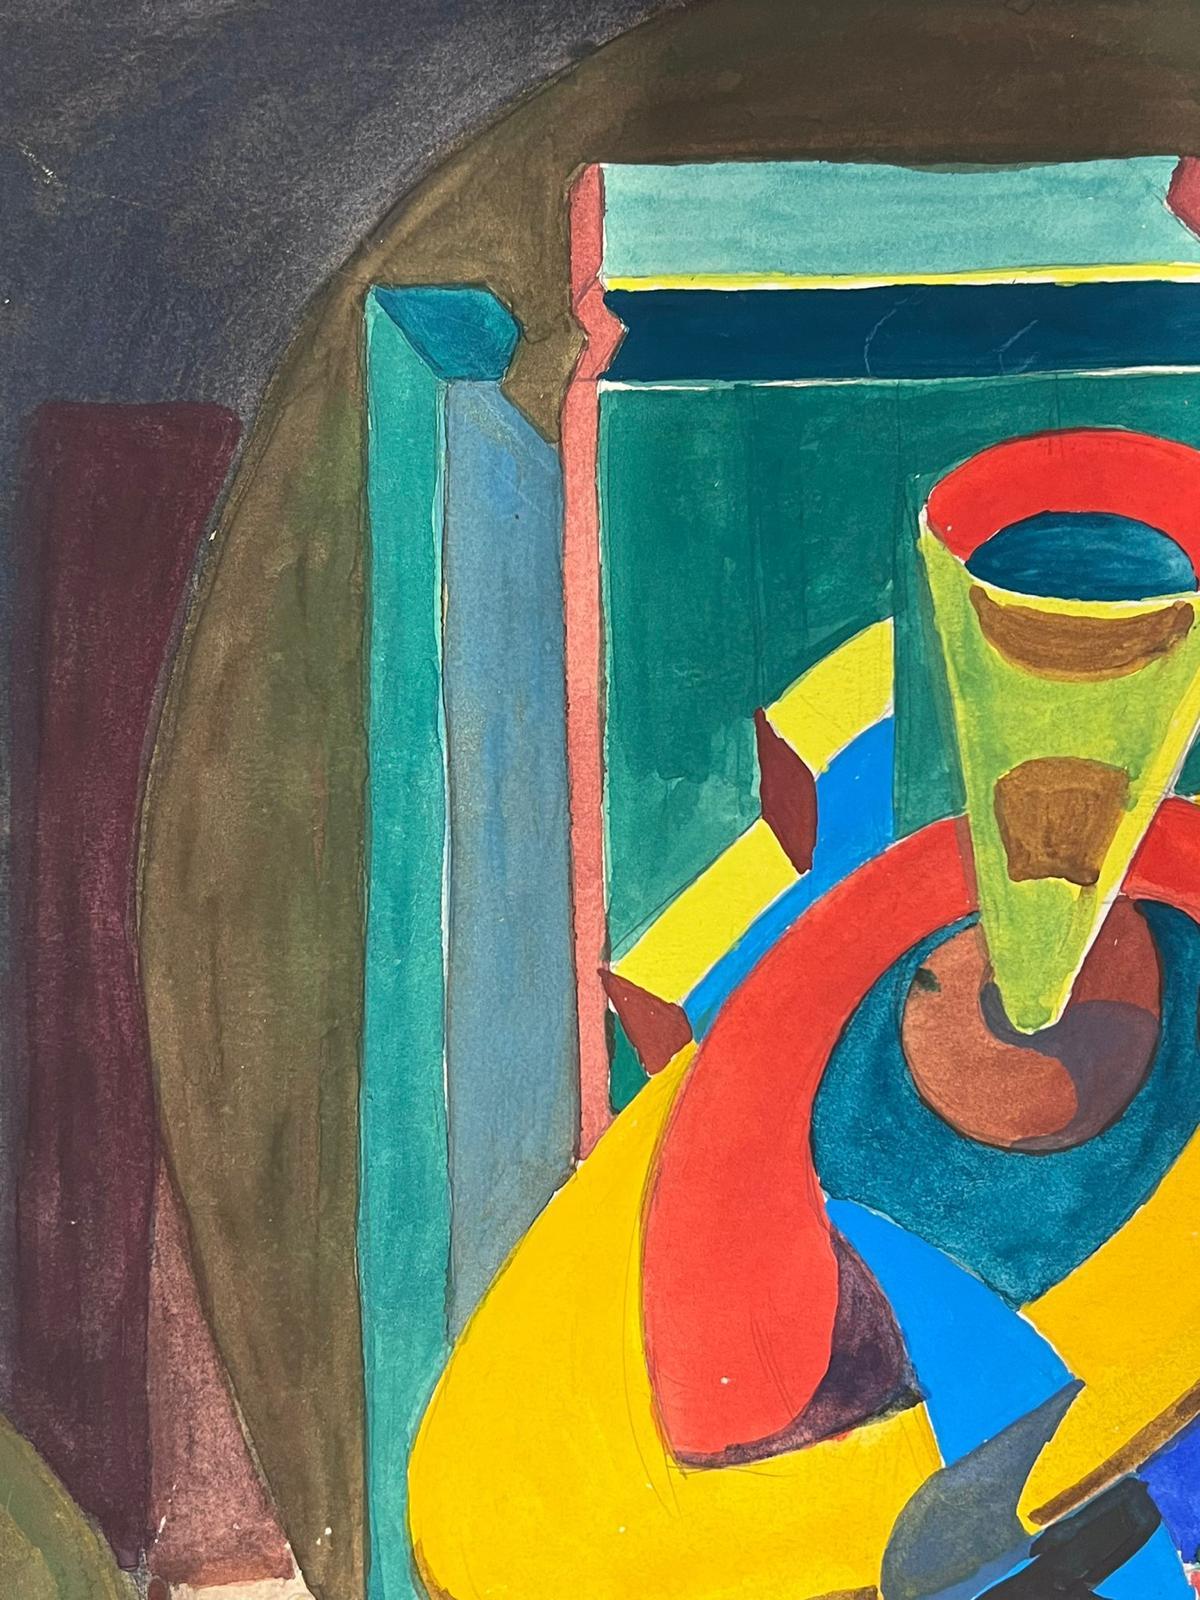 Abstract Composition
by Guy Nicod
(French 1923 - 2021)
watercolour on artist paper, unframed
painting : 20 x 14 inches
provenance: artists estate, France
condition: very good and sound condition